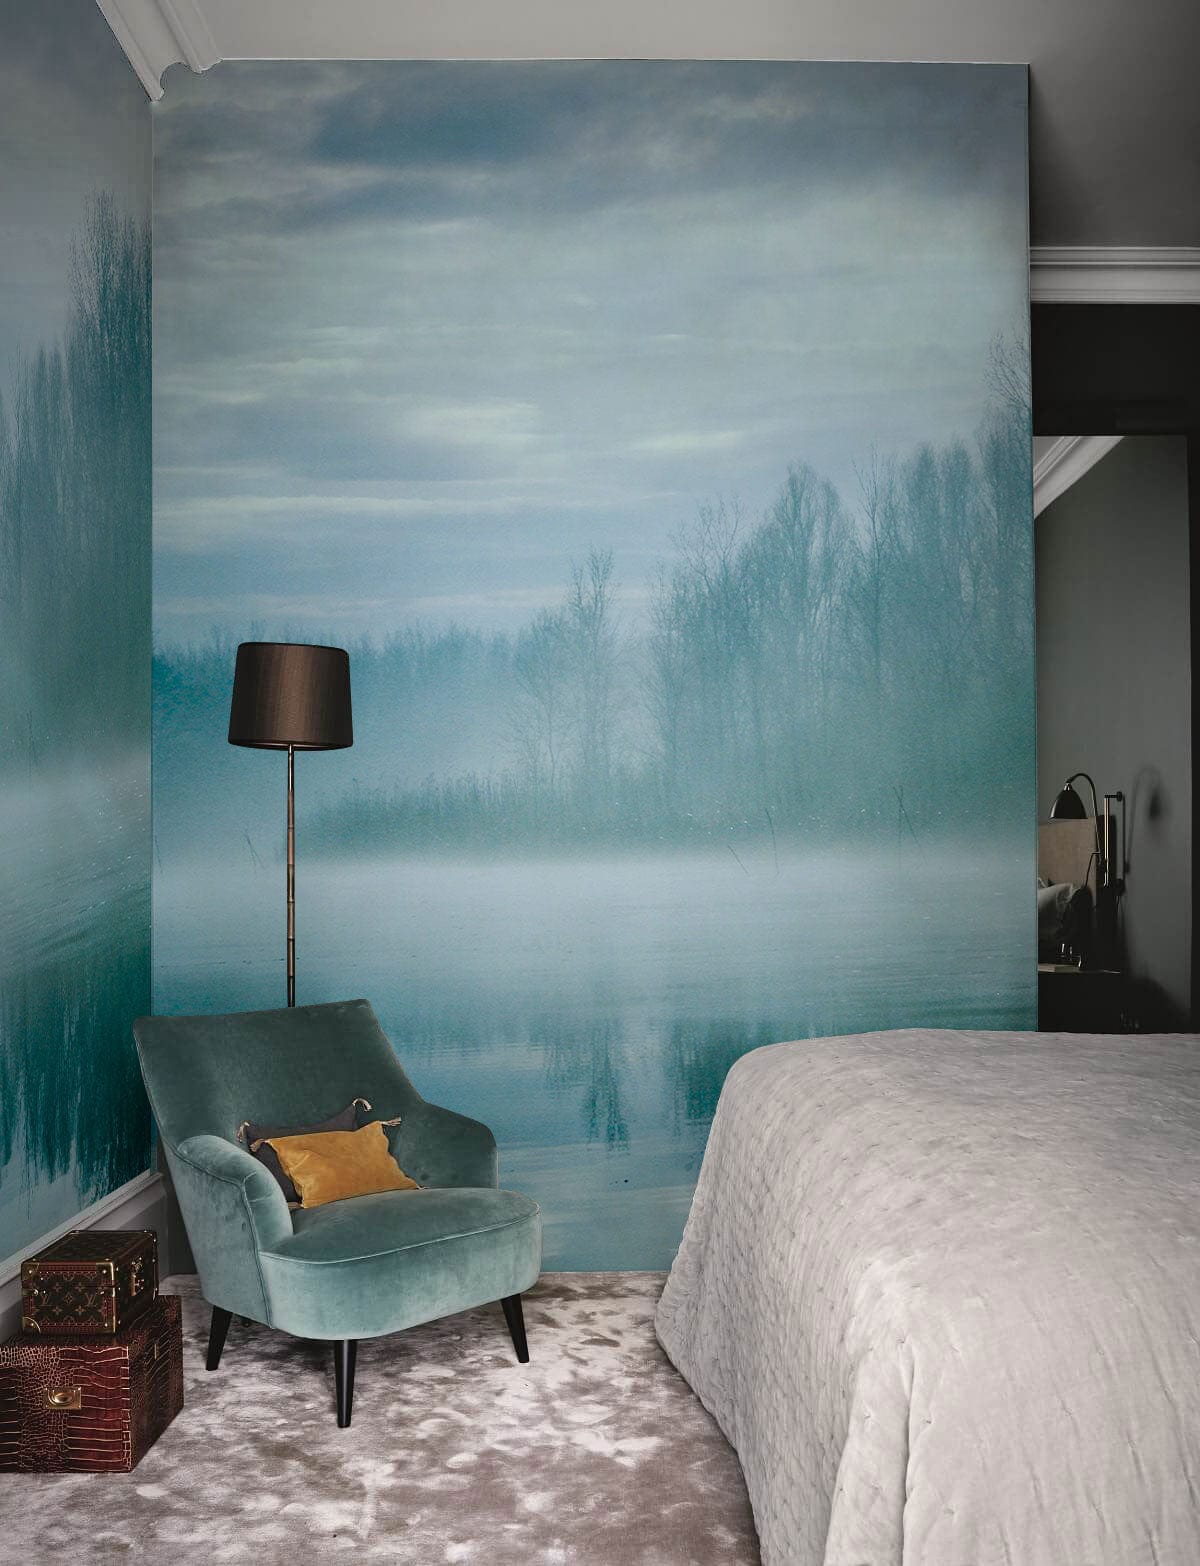 Wallpaper mural with a misty forest lake, ideal for use as a bedroom decoration